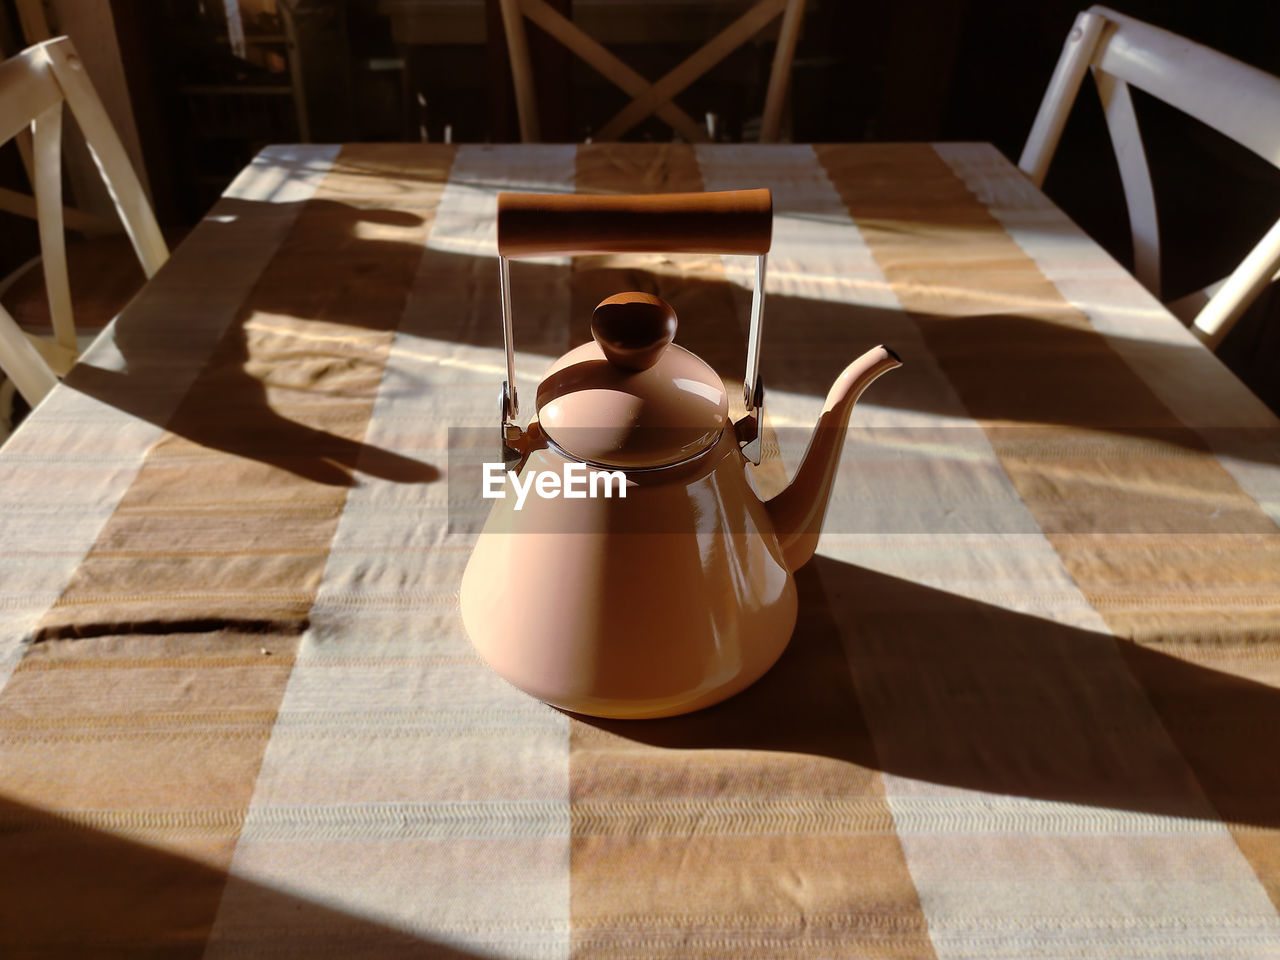 A cream colored teapot on the tablecloth in the morning time